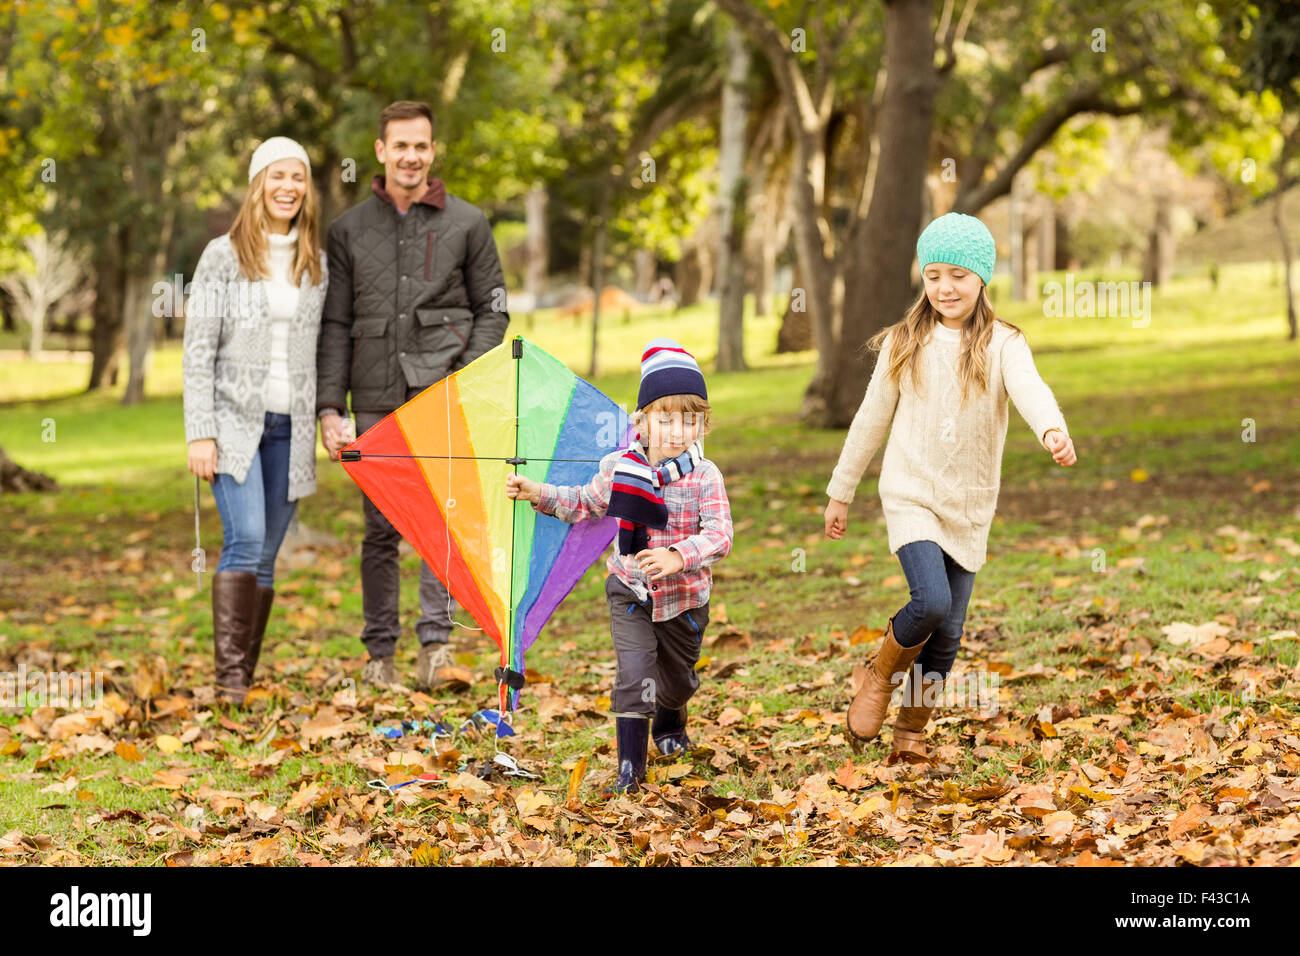 Young family playing with a kite Stock Photo